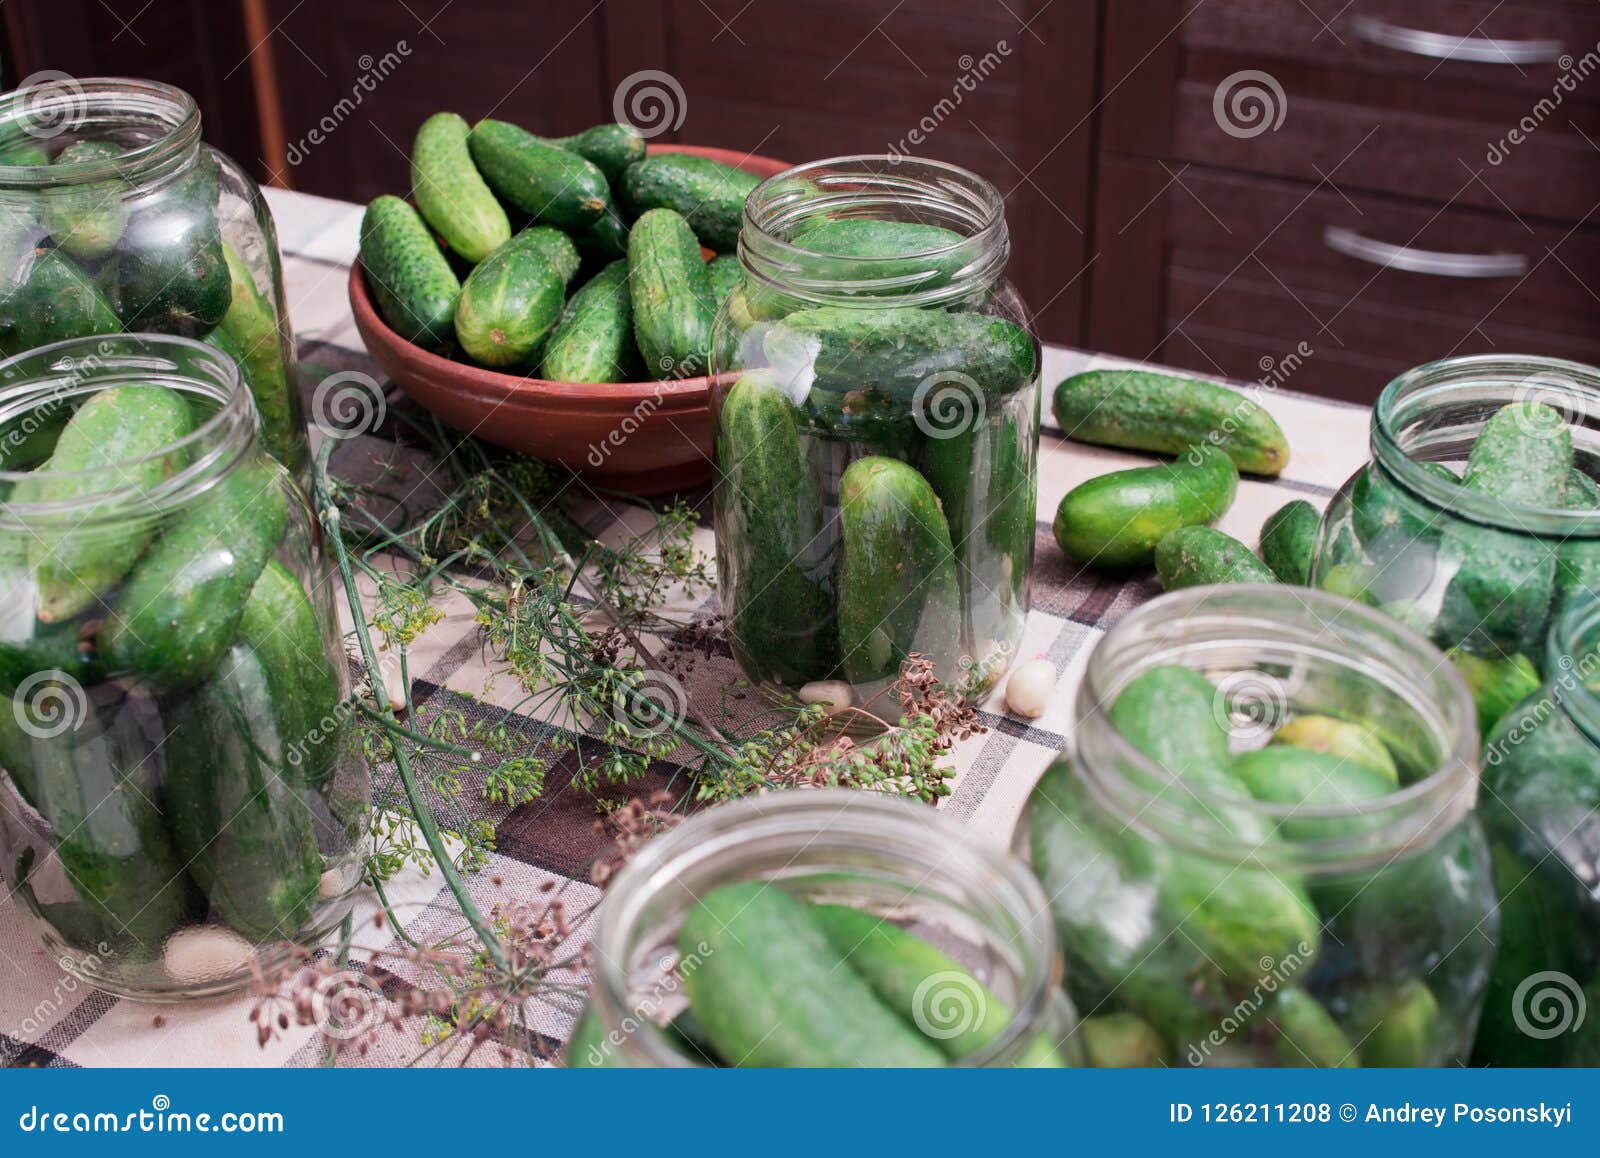 Preparation of Cucumbers for Home Canning Pickles. Stock Photo - Image